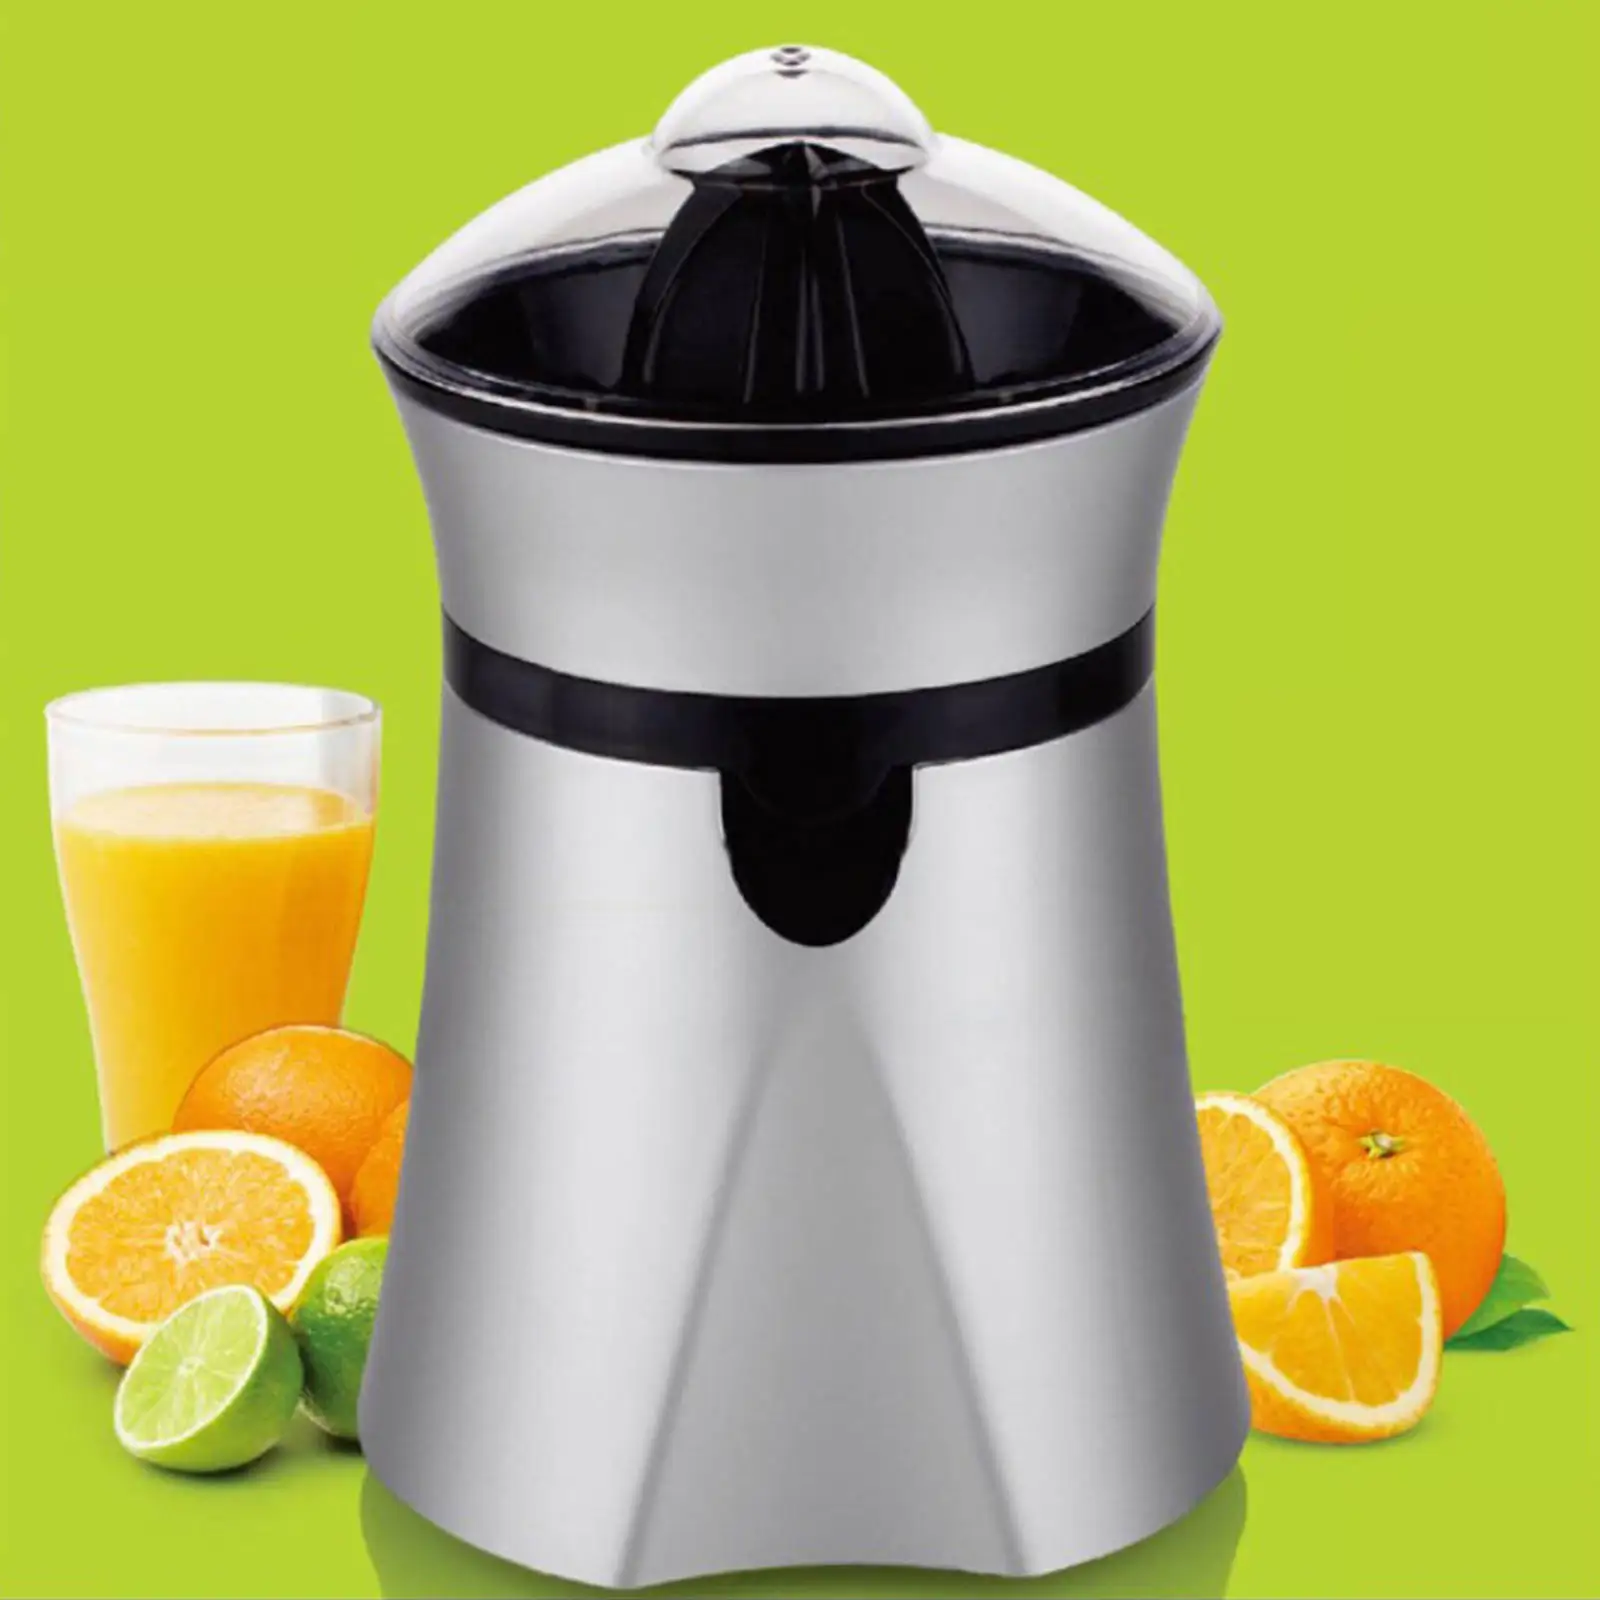 Stainless Steel Electric Juicer with Two Interchangeable Cones Electric Citrus Juicer Juice Maker Machine Blender